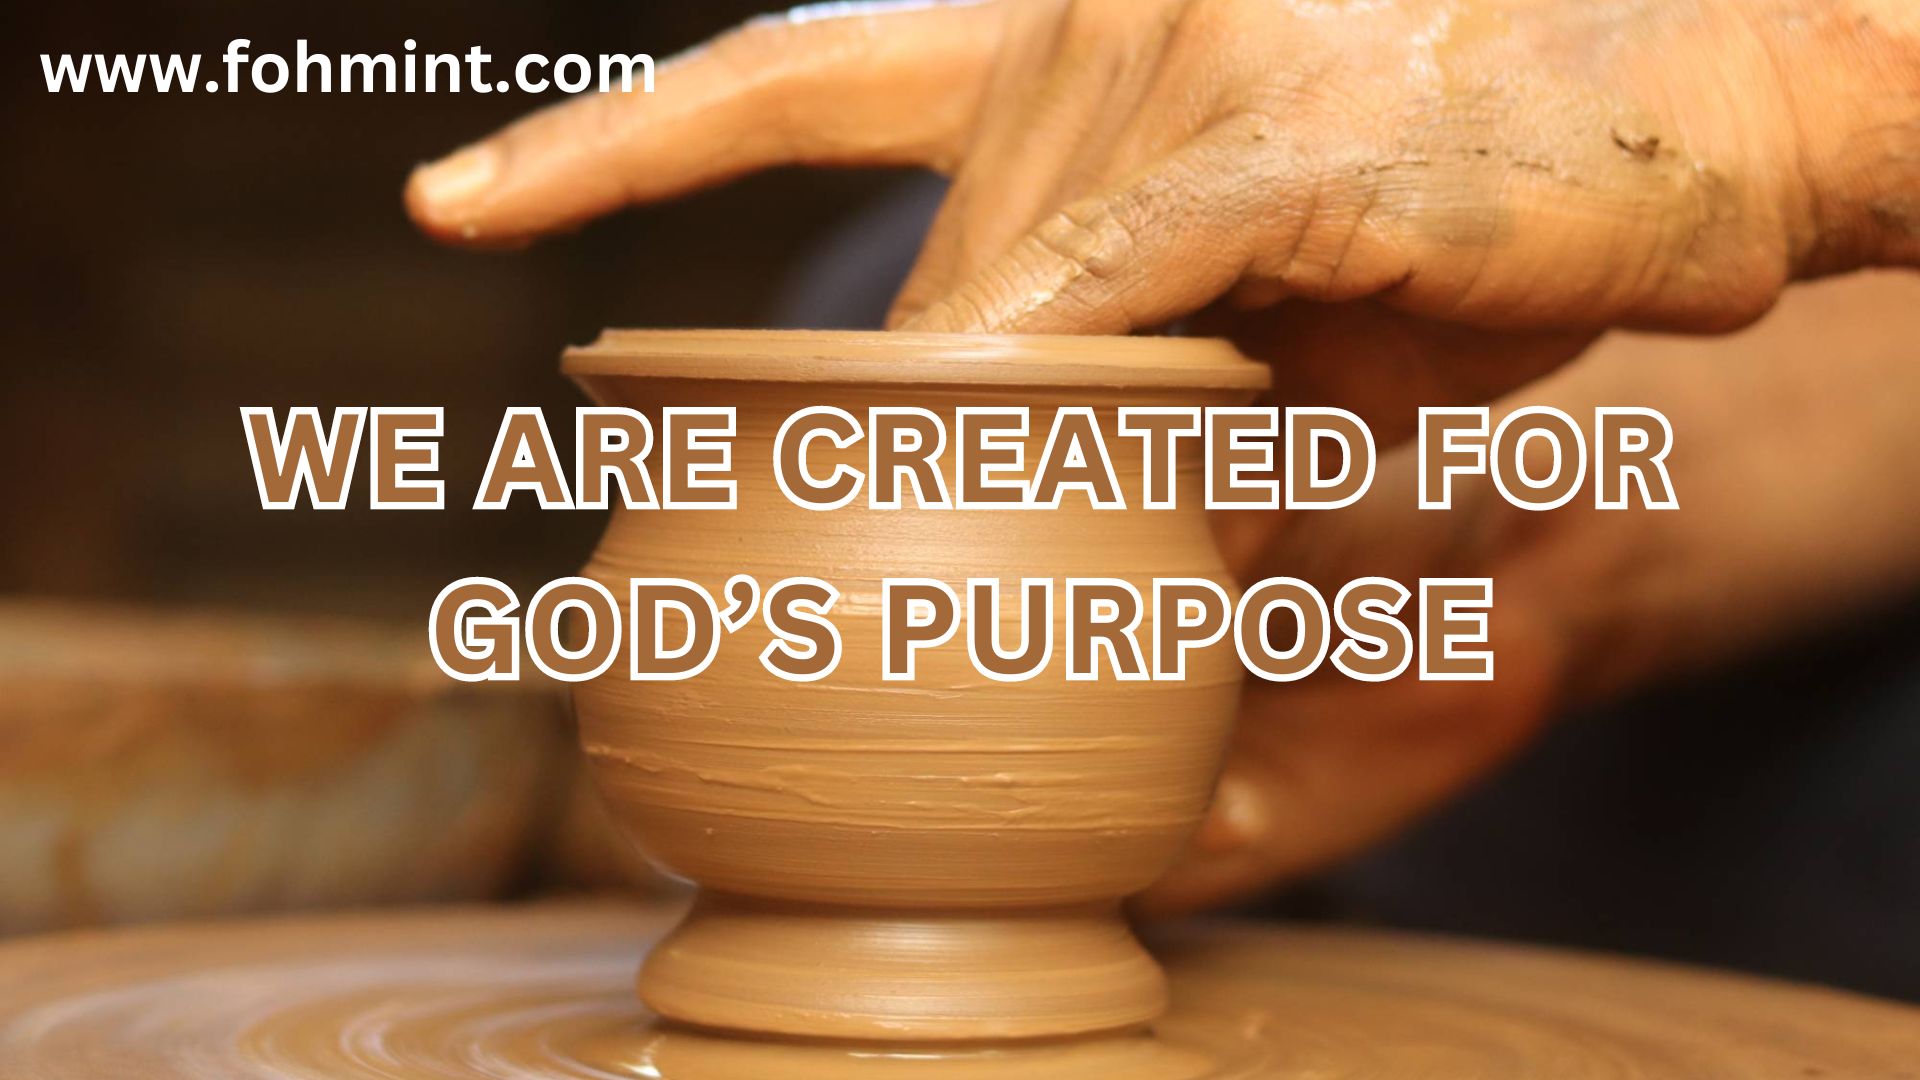 We are created for God's Purpose